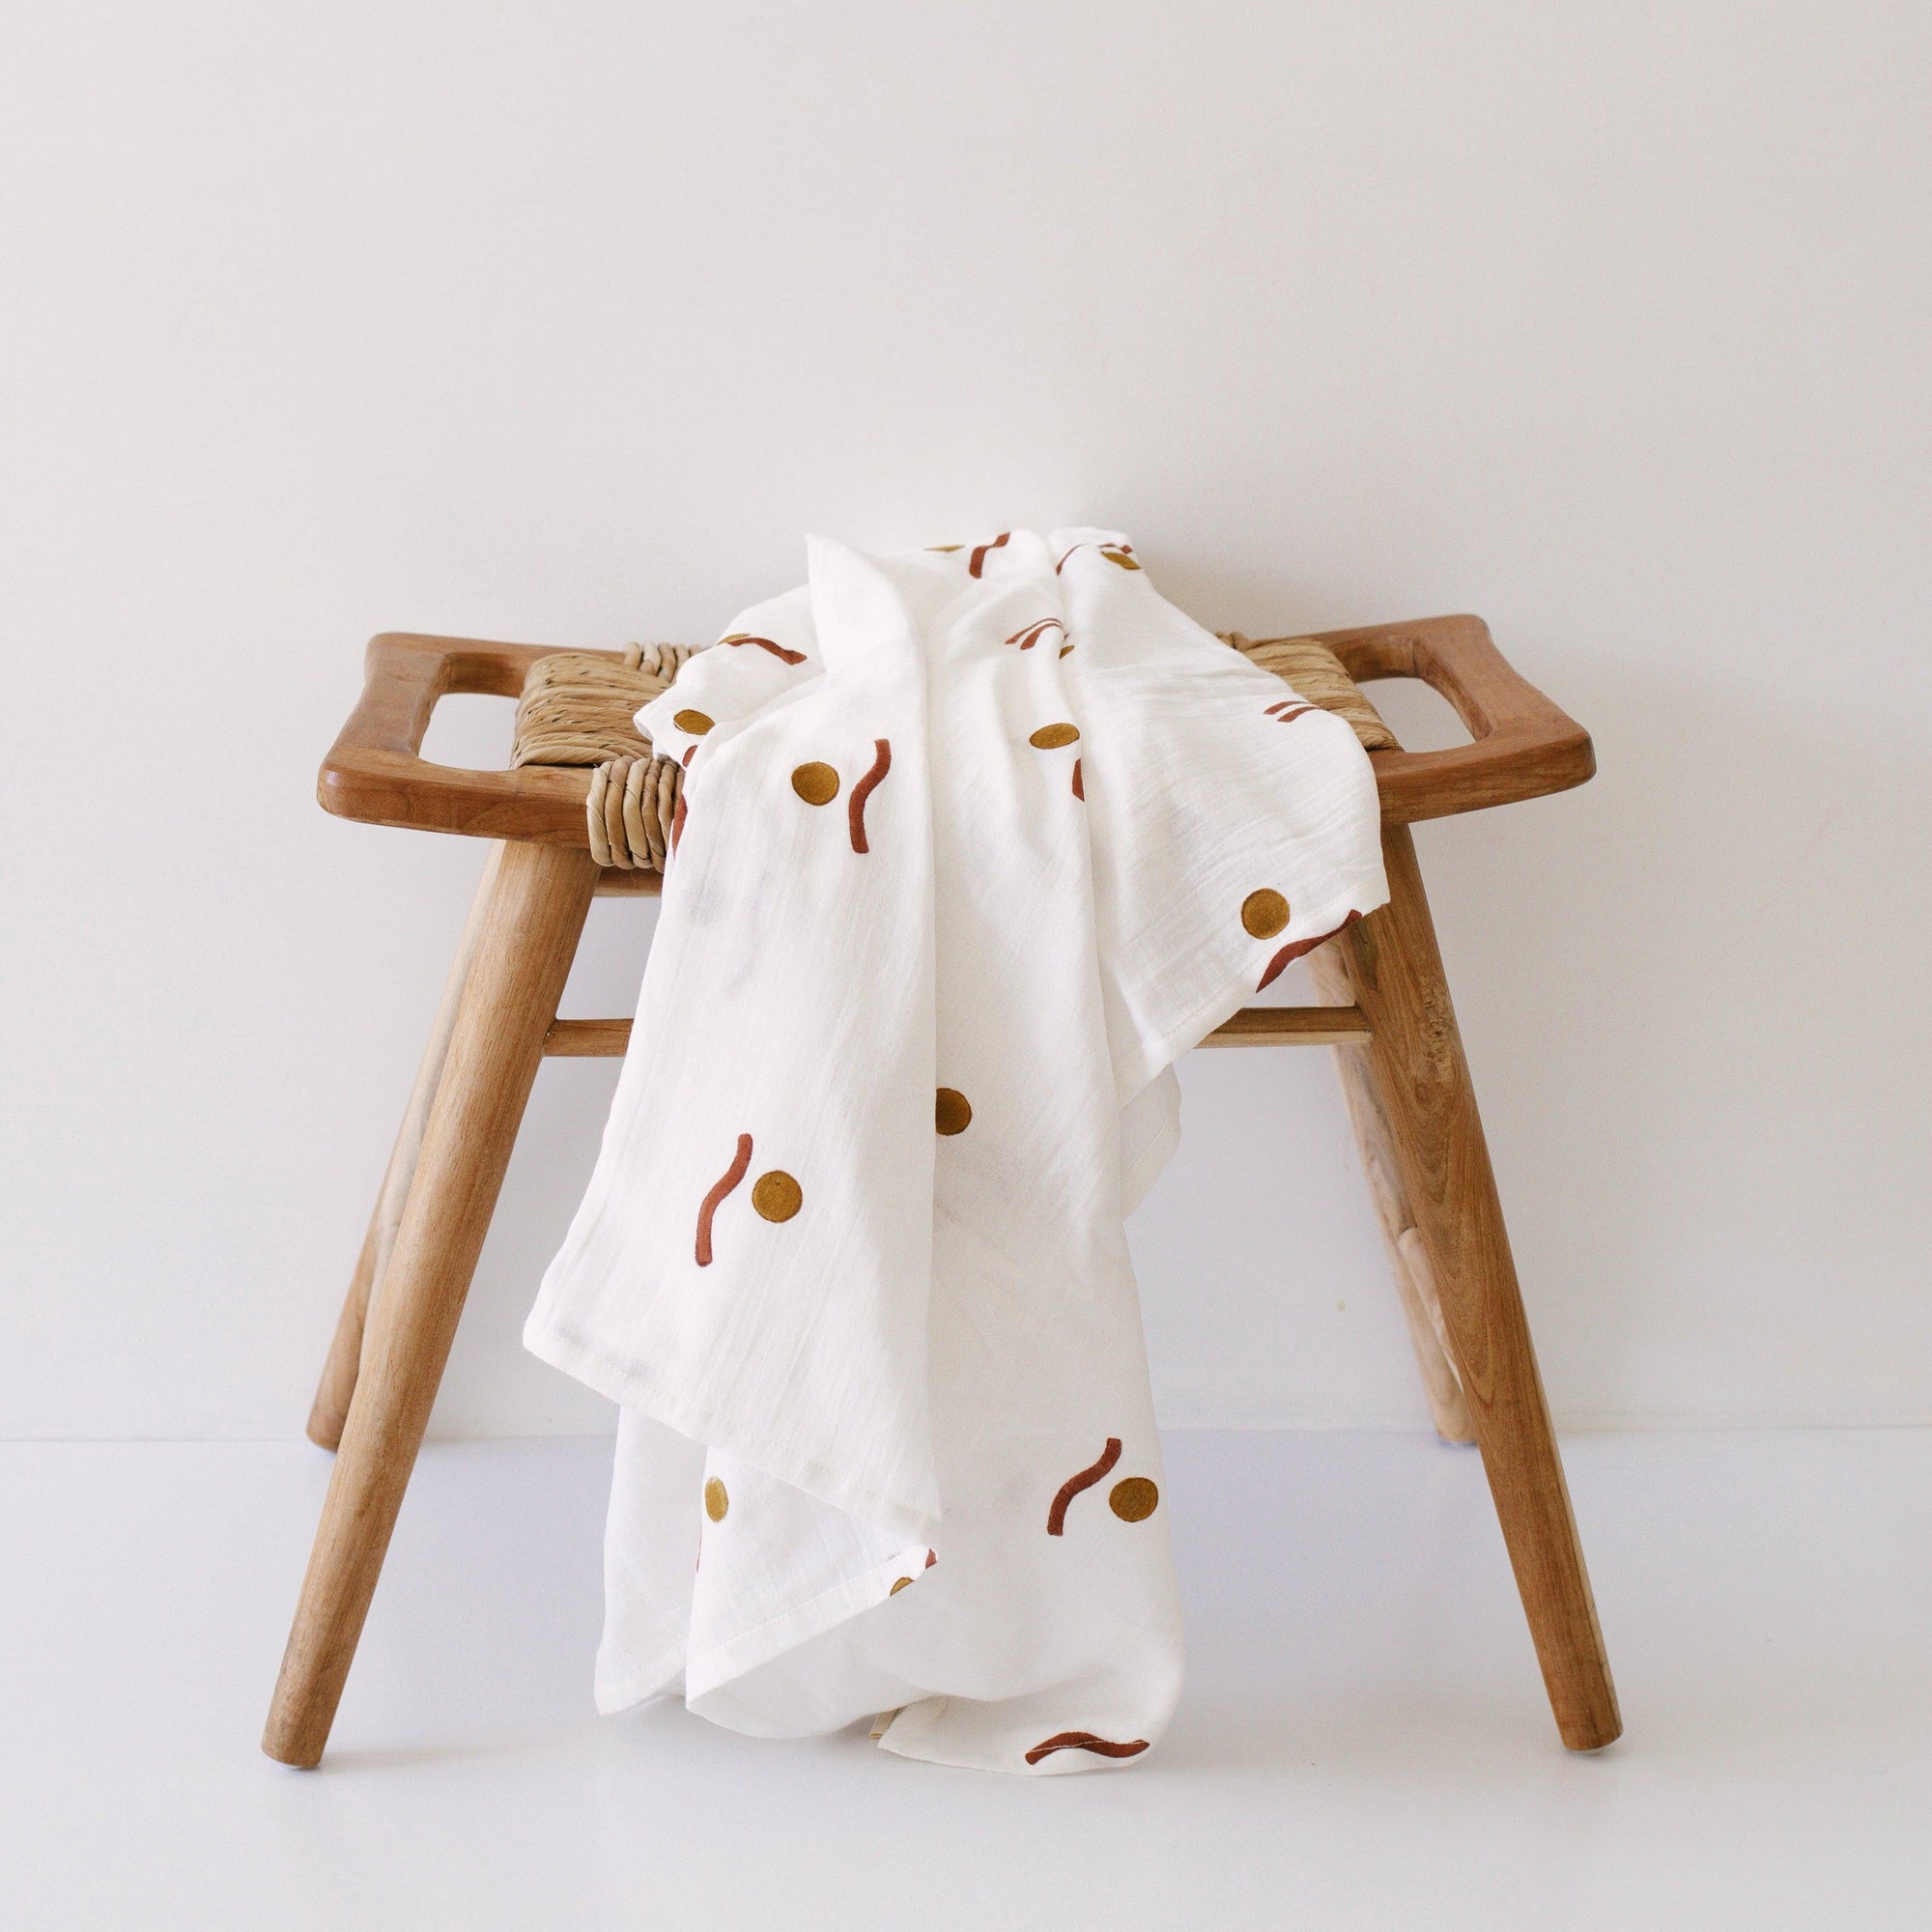 This muslin wrap is a beautiful GOTs certified organic cotton creating a super soft blanket for the littlest member of the family.